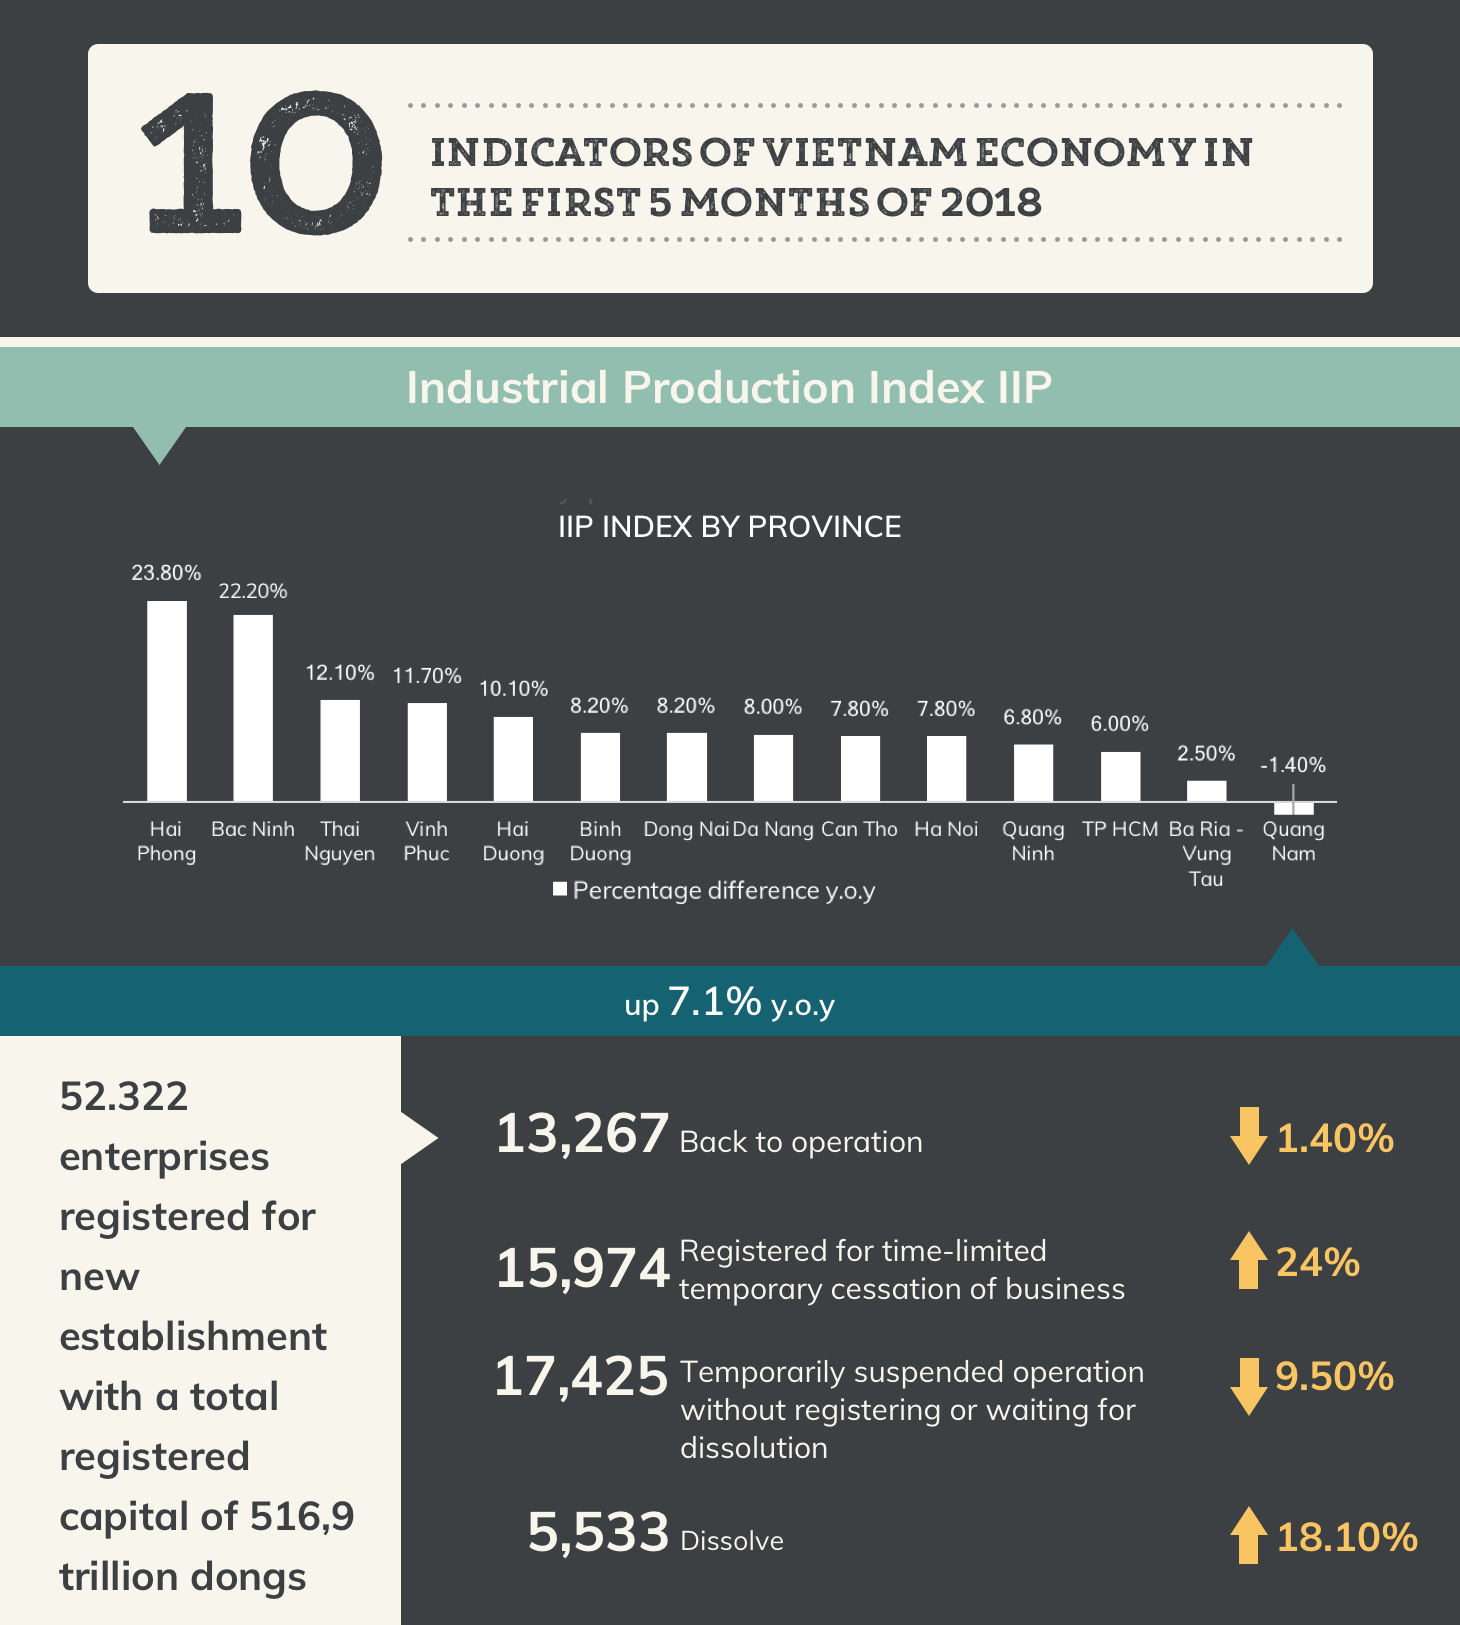 INFOGRAPHIC: 10 INDICATORS OF VIETNAM ECONOMY IN THE FIRST 5 MONTHS OF 2018